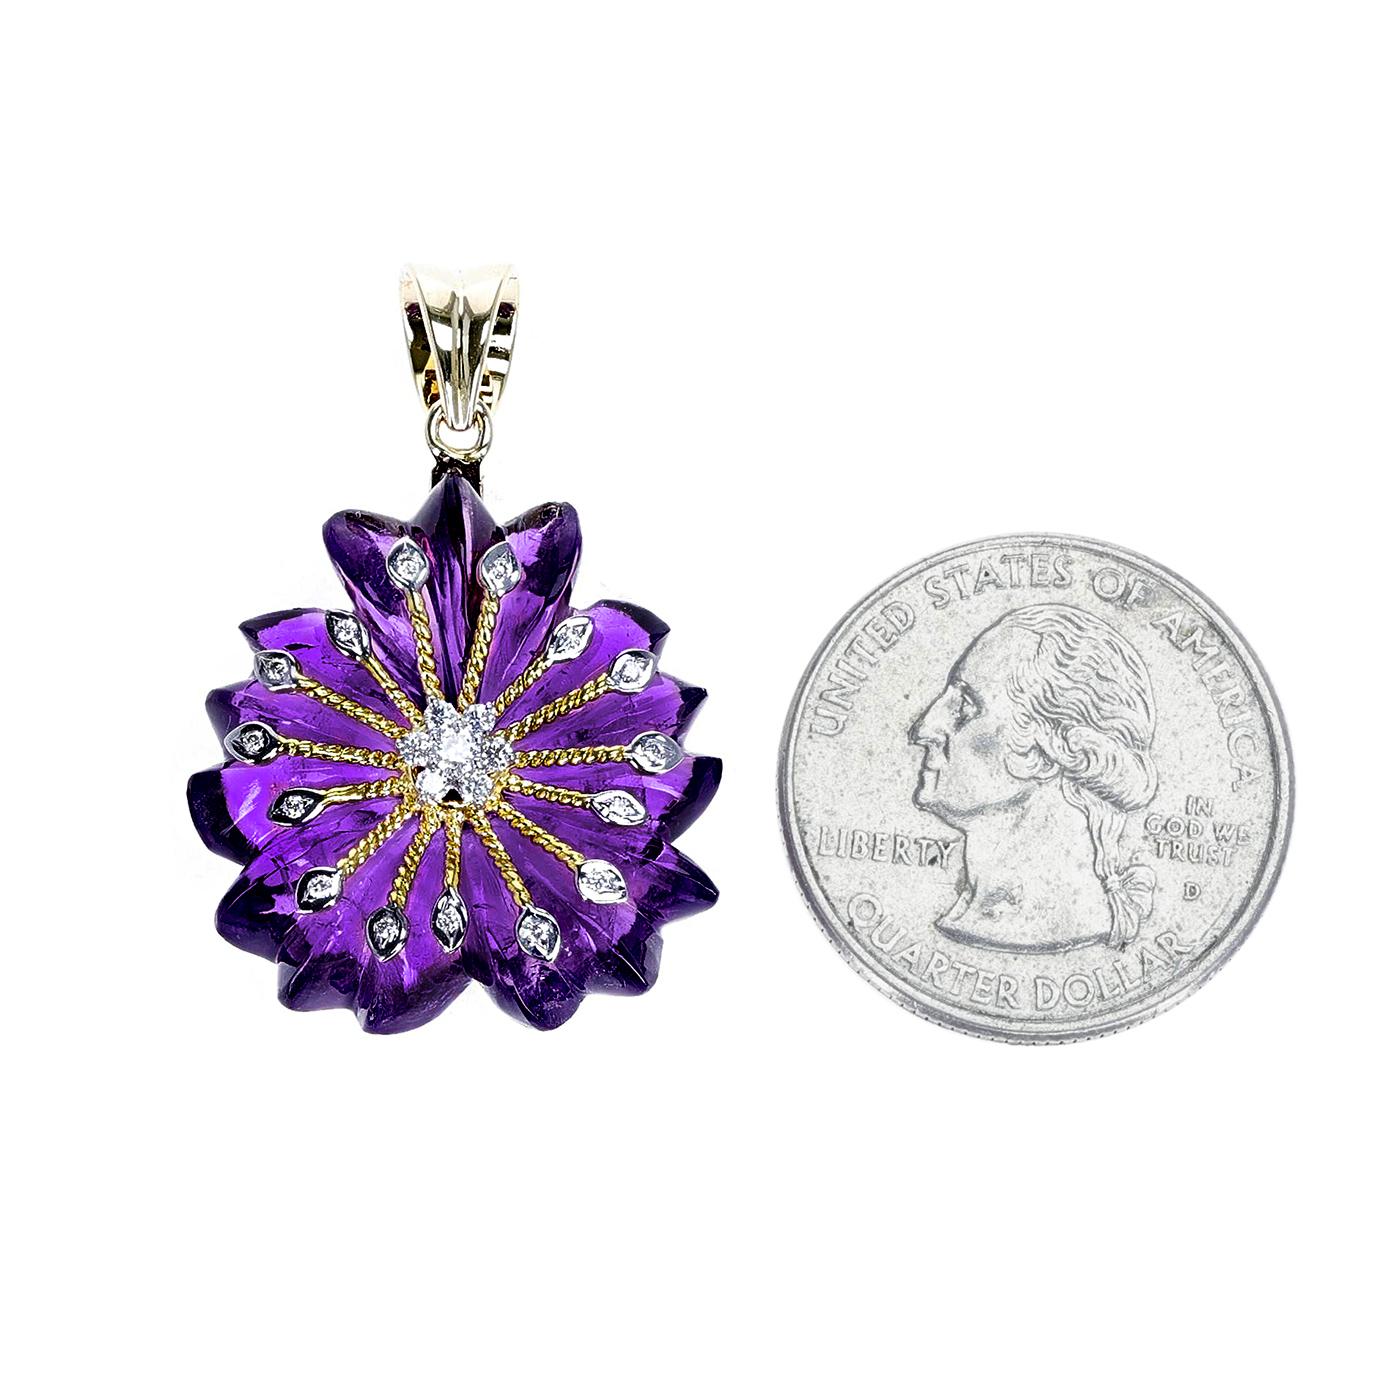 An Amethyst Carved Floral Pendant with 14k Gold and Diamonds. Length: 1.25 inches. The total weight of the pendant is 7 grams. The amethyst is appx. 25 carats and the diamonds weigh appx. 0.22 carats. 